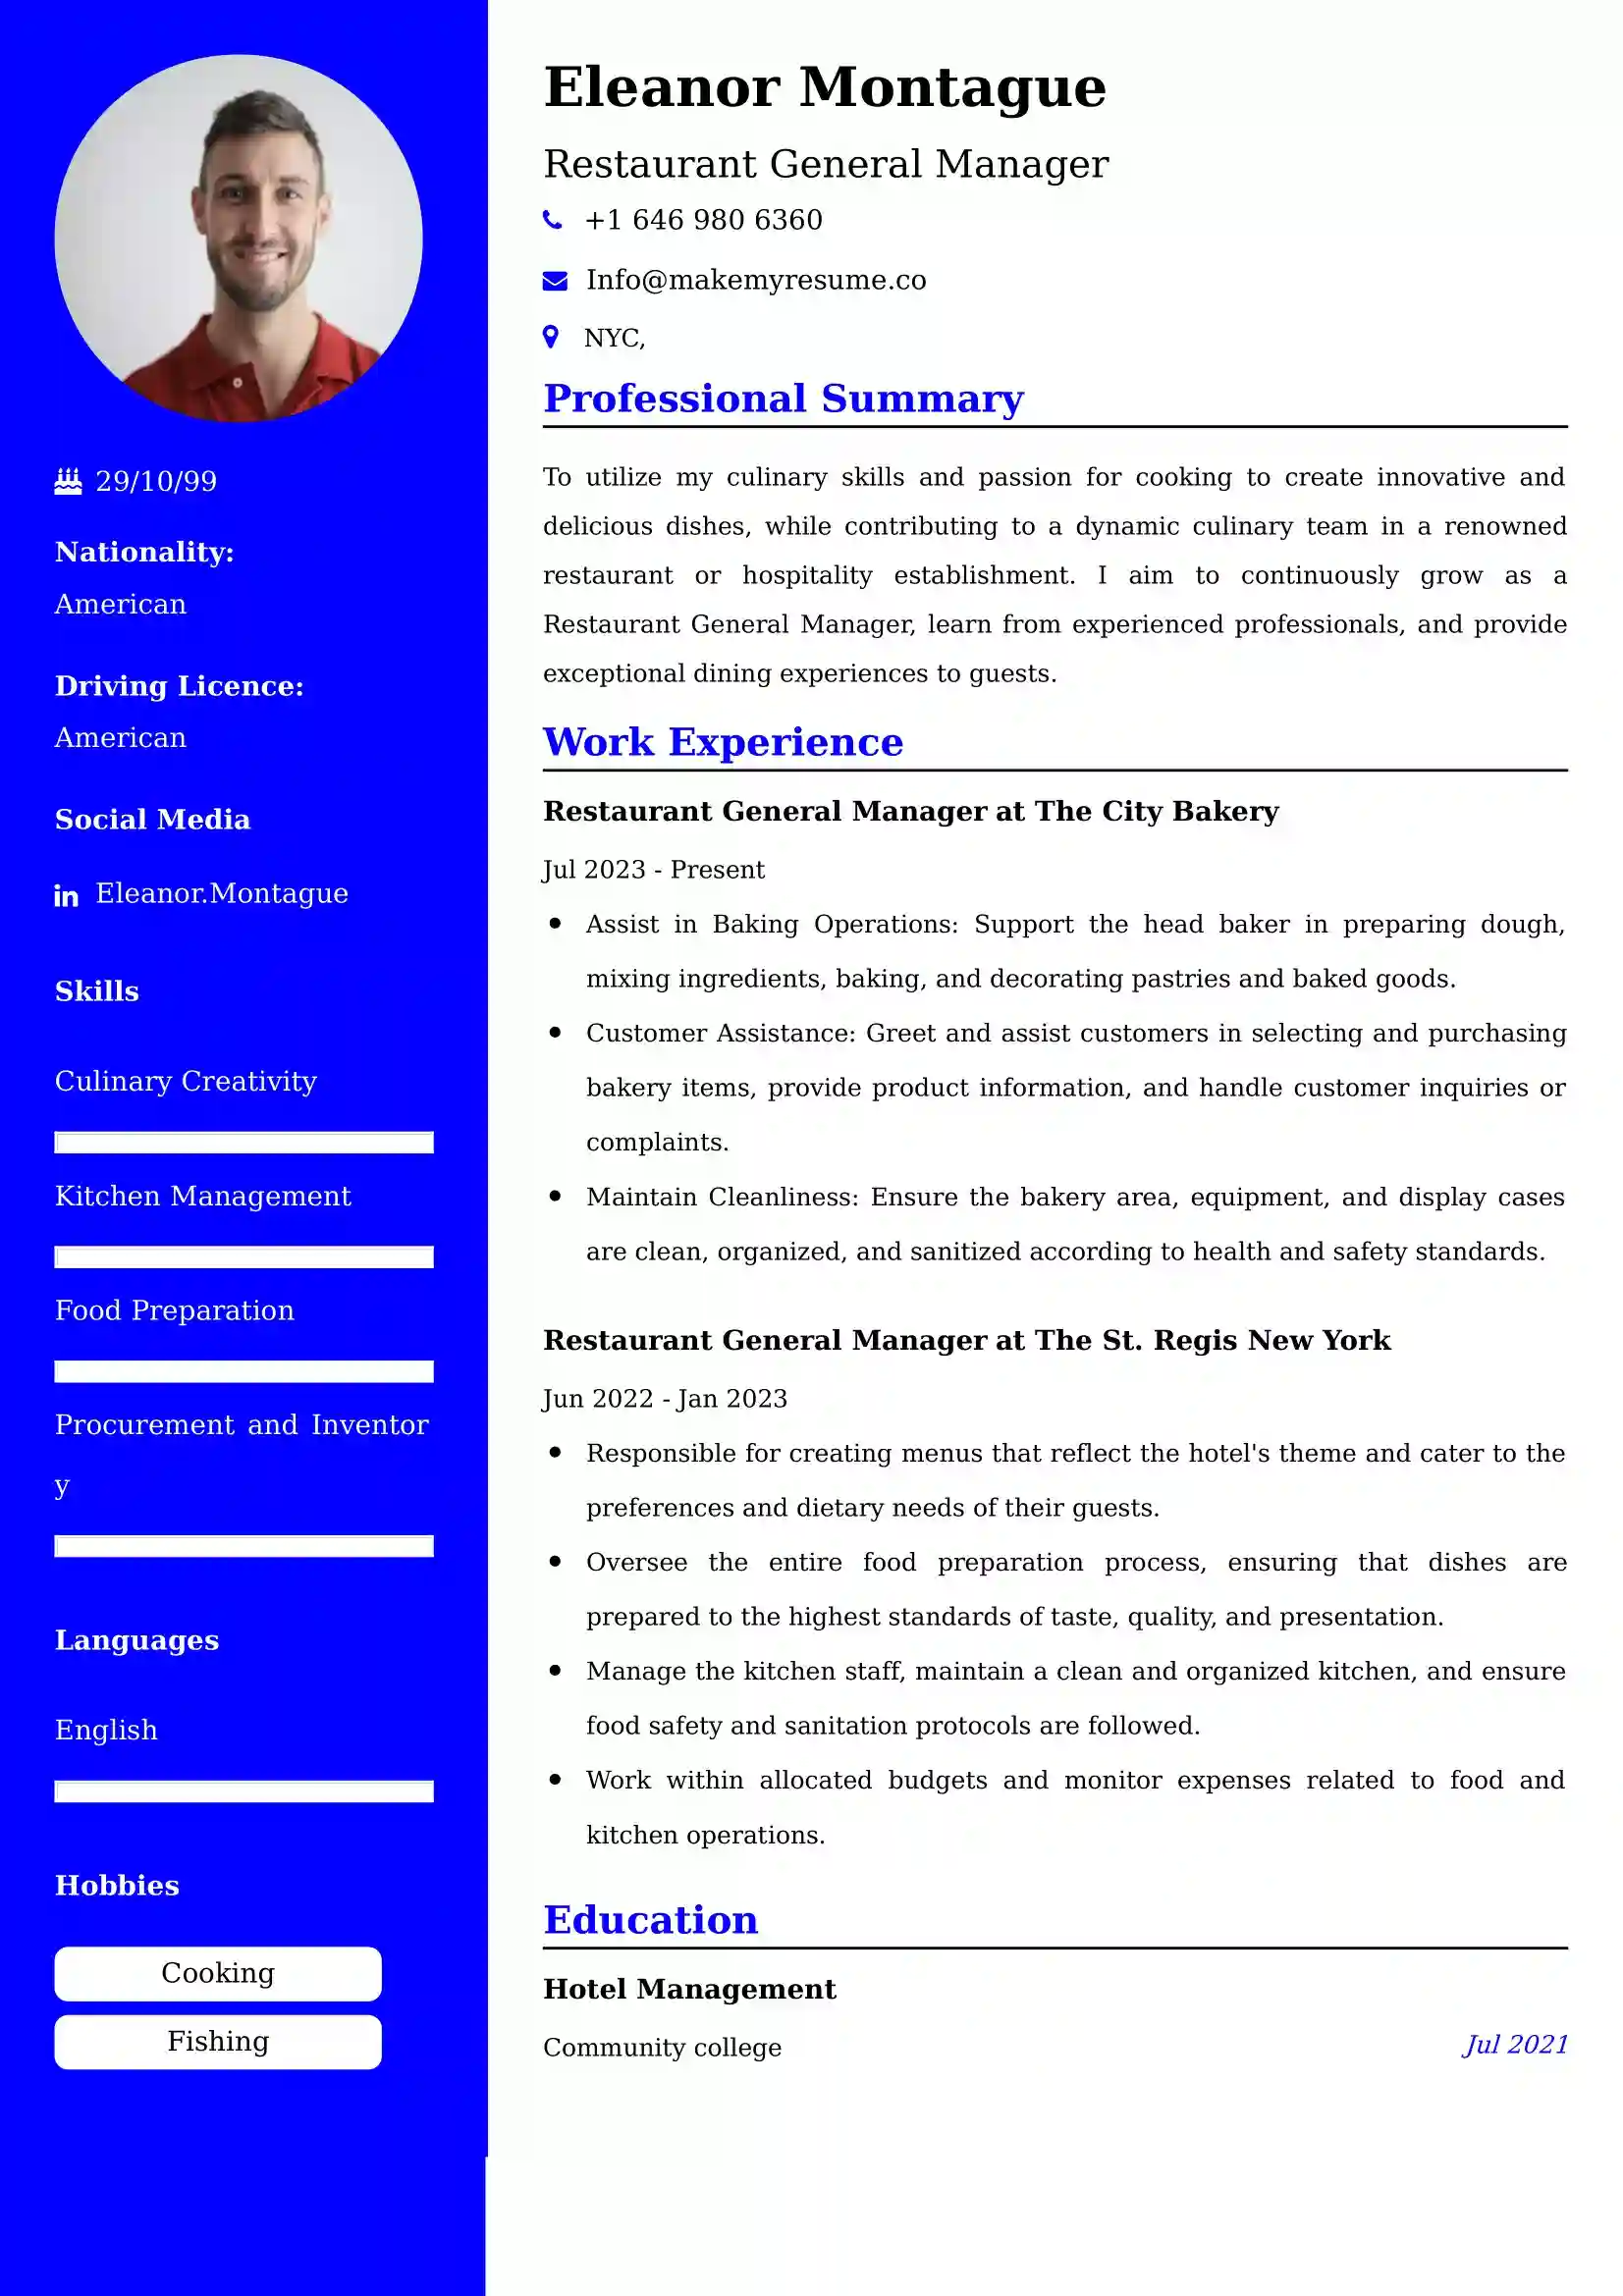 Restaurant General Manager Resume Examples for UK Jobs - Tips and Guide